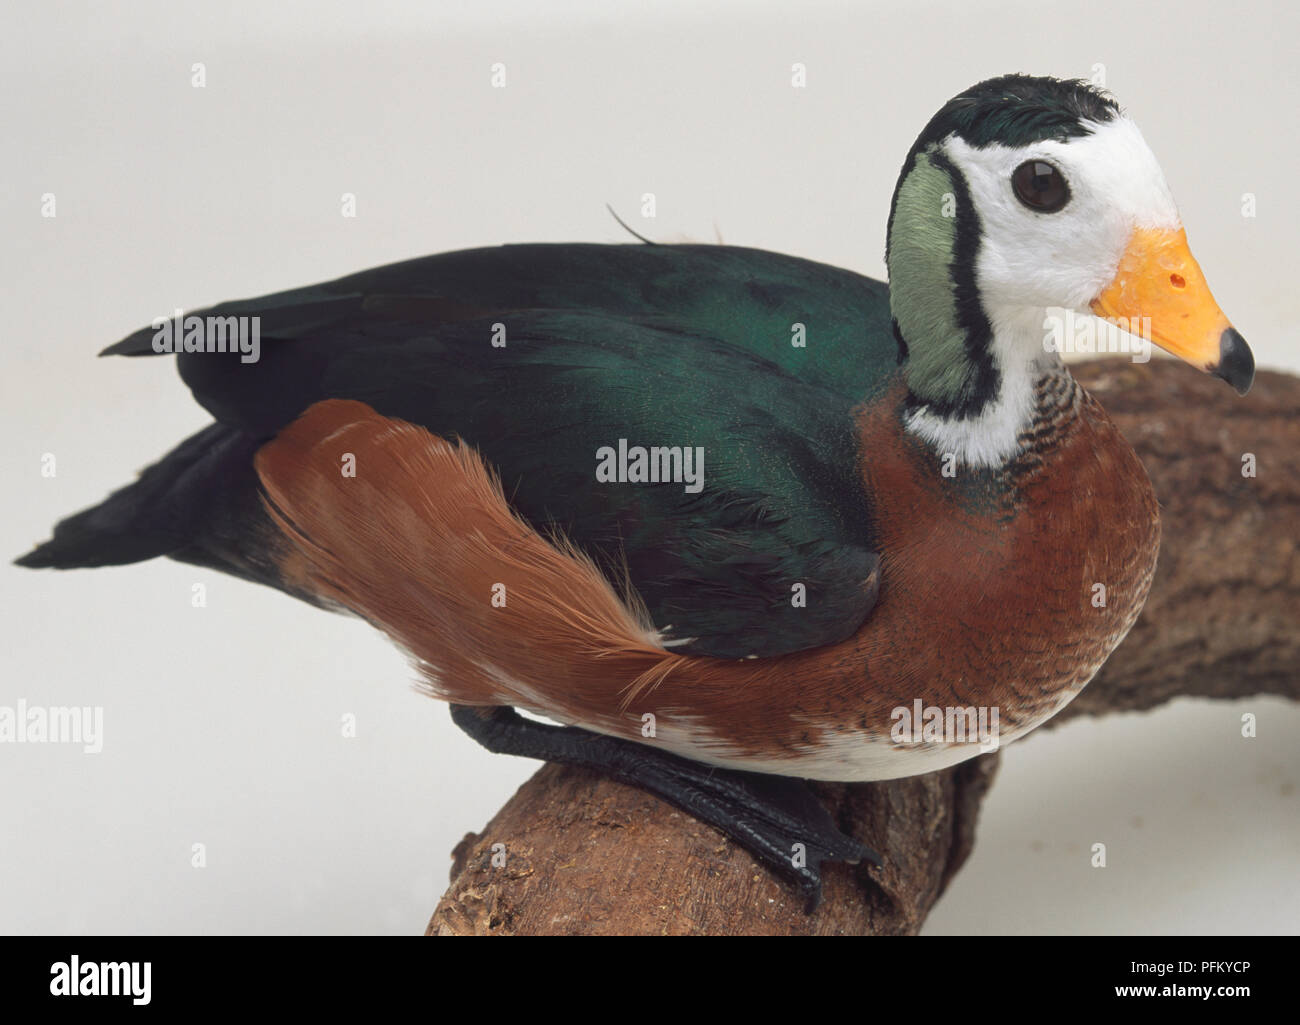 Side overhead view of an African Pygmy Goose, standing on a branch, showing the unusual head and body plumage, head in profile with stout, seed-eating bill, short, and broad tail. Stock Photo